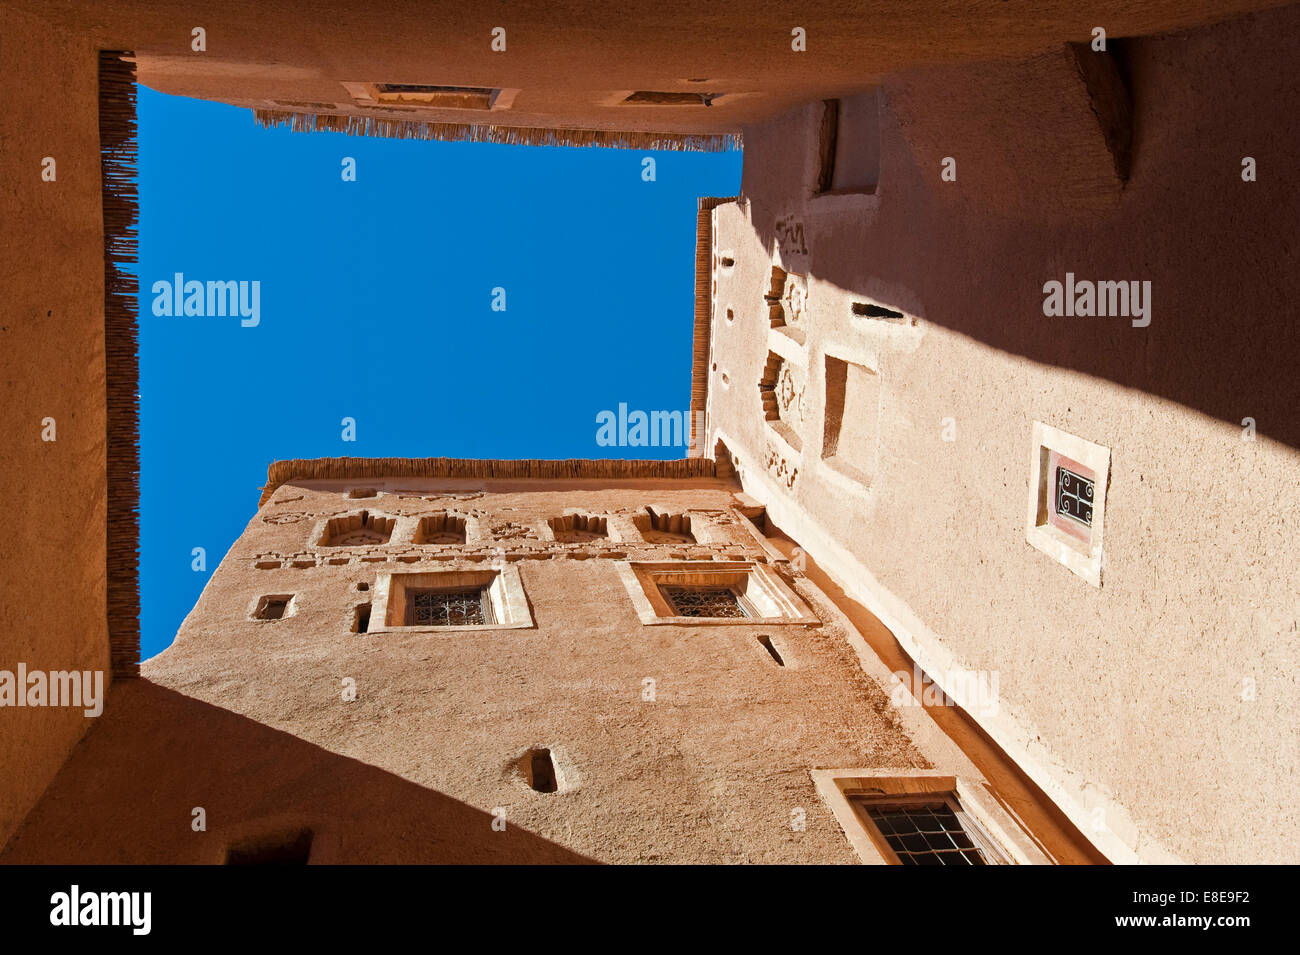 Horizontal view of Kasbah Taourirt in Ouarzazate. Stock Photo